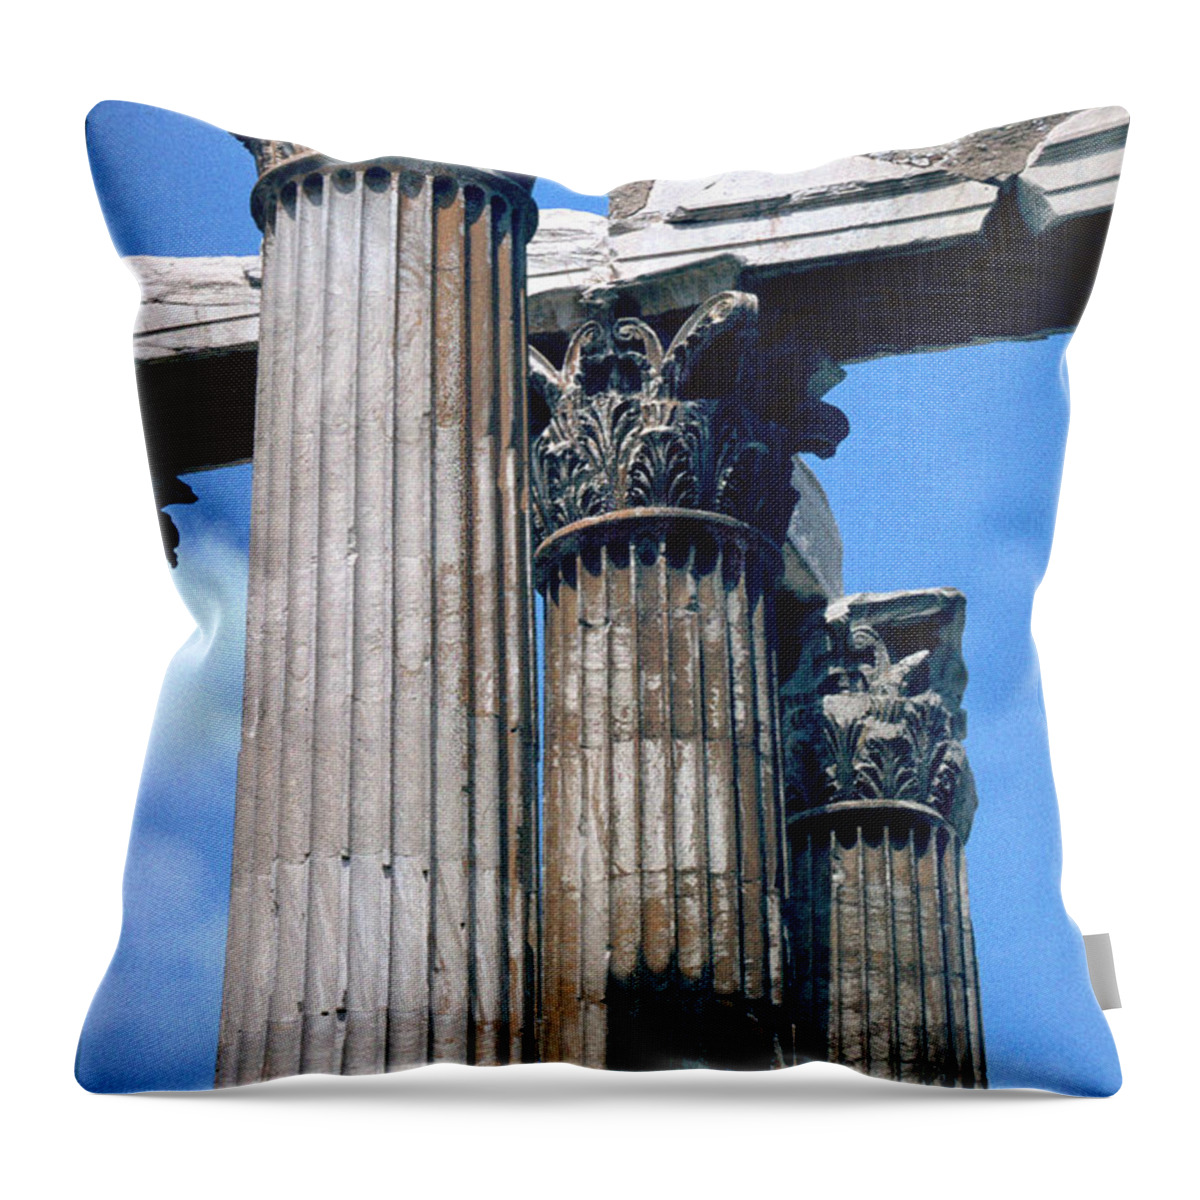 Acropolis Throw Pillow featuring the photograph Acropolis by Flavia Westerwelle